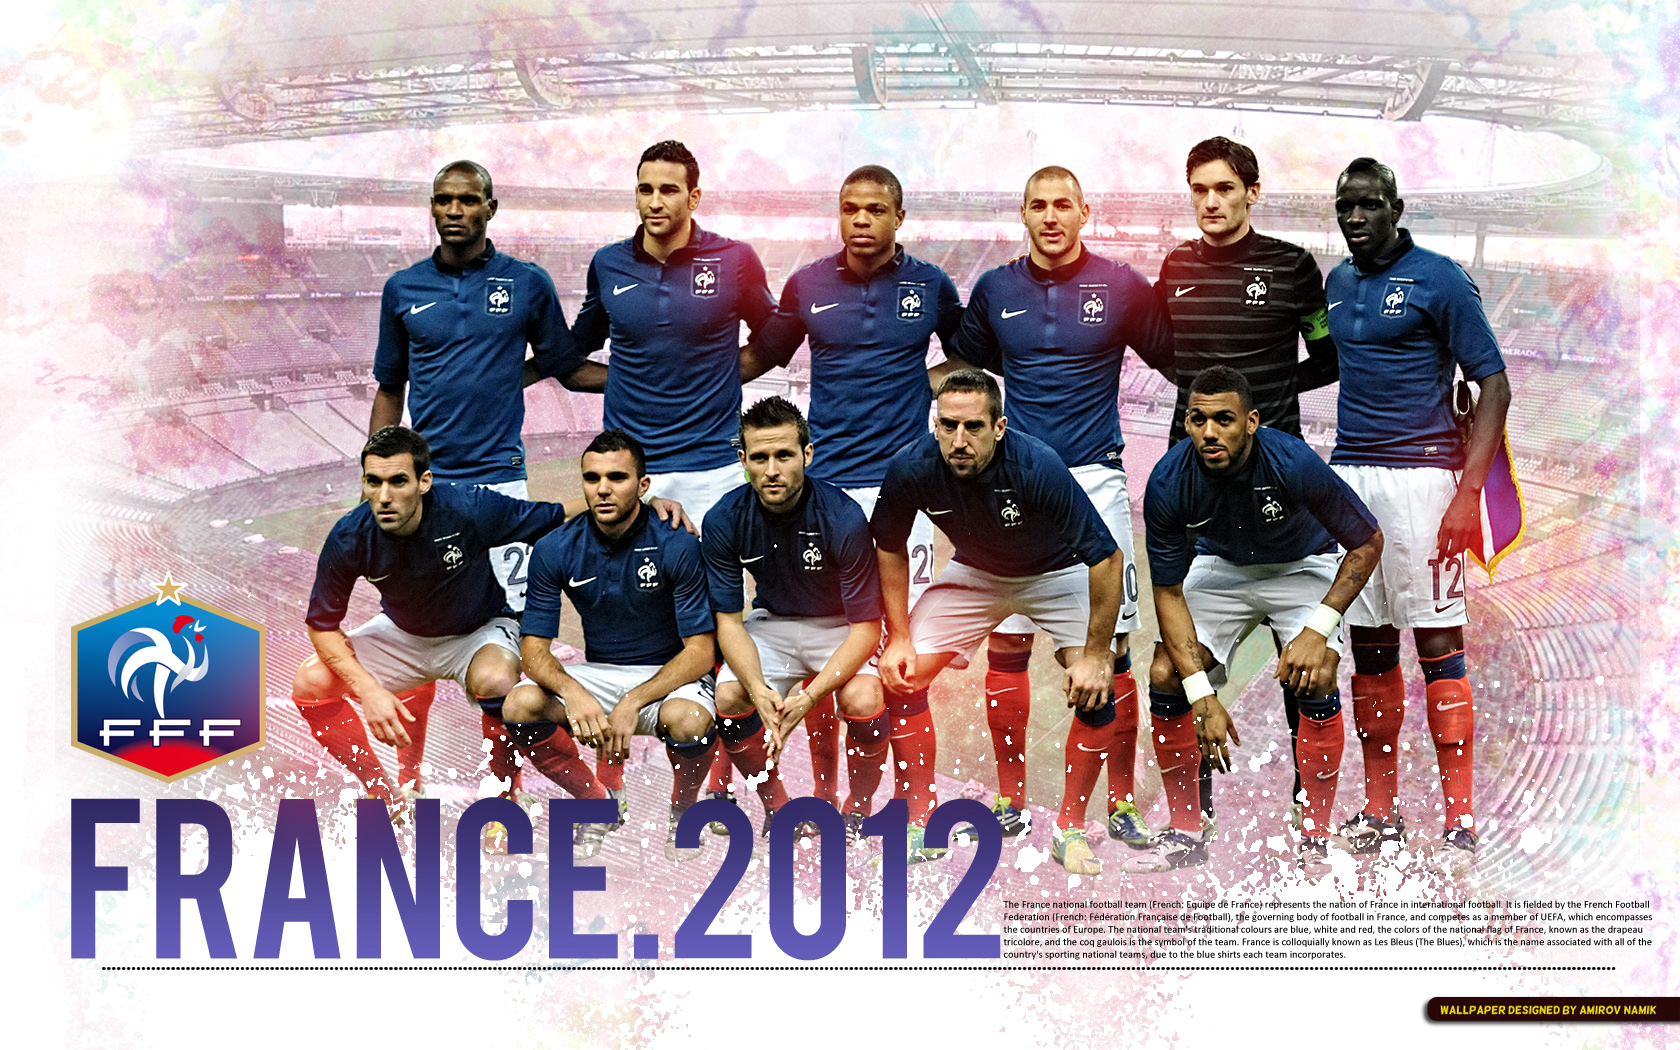 France National Football Team Picture by Namik Amirov